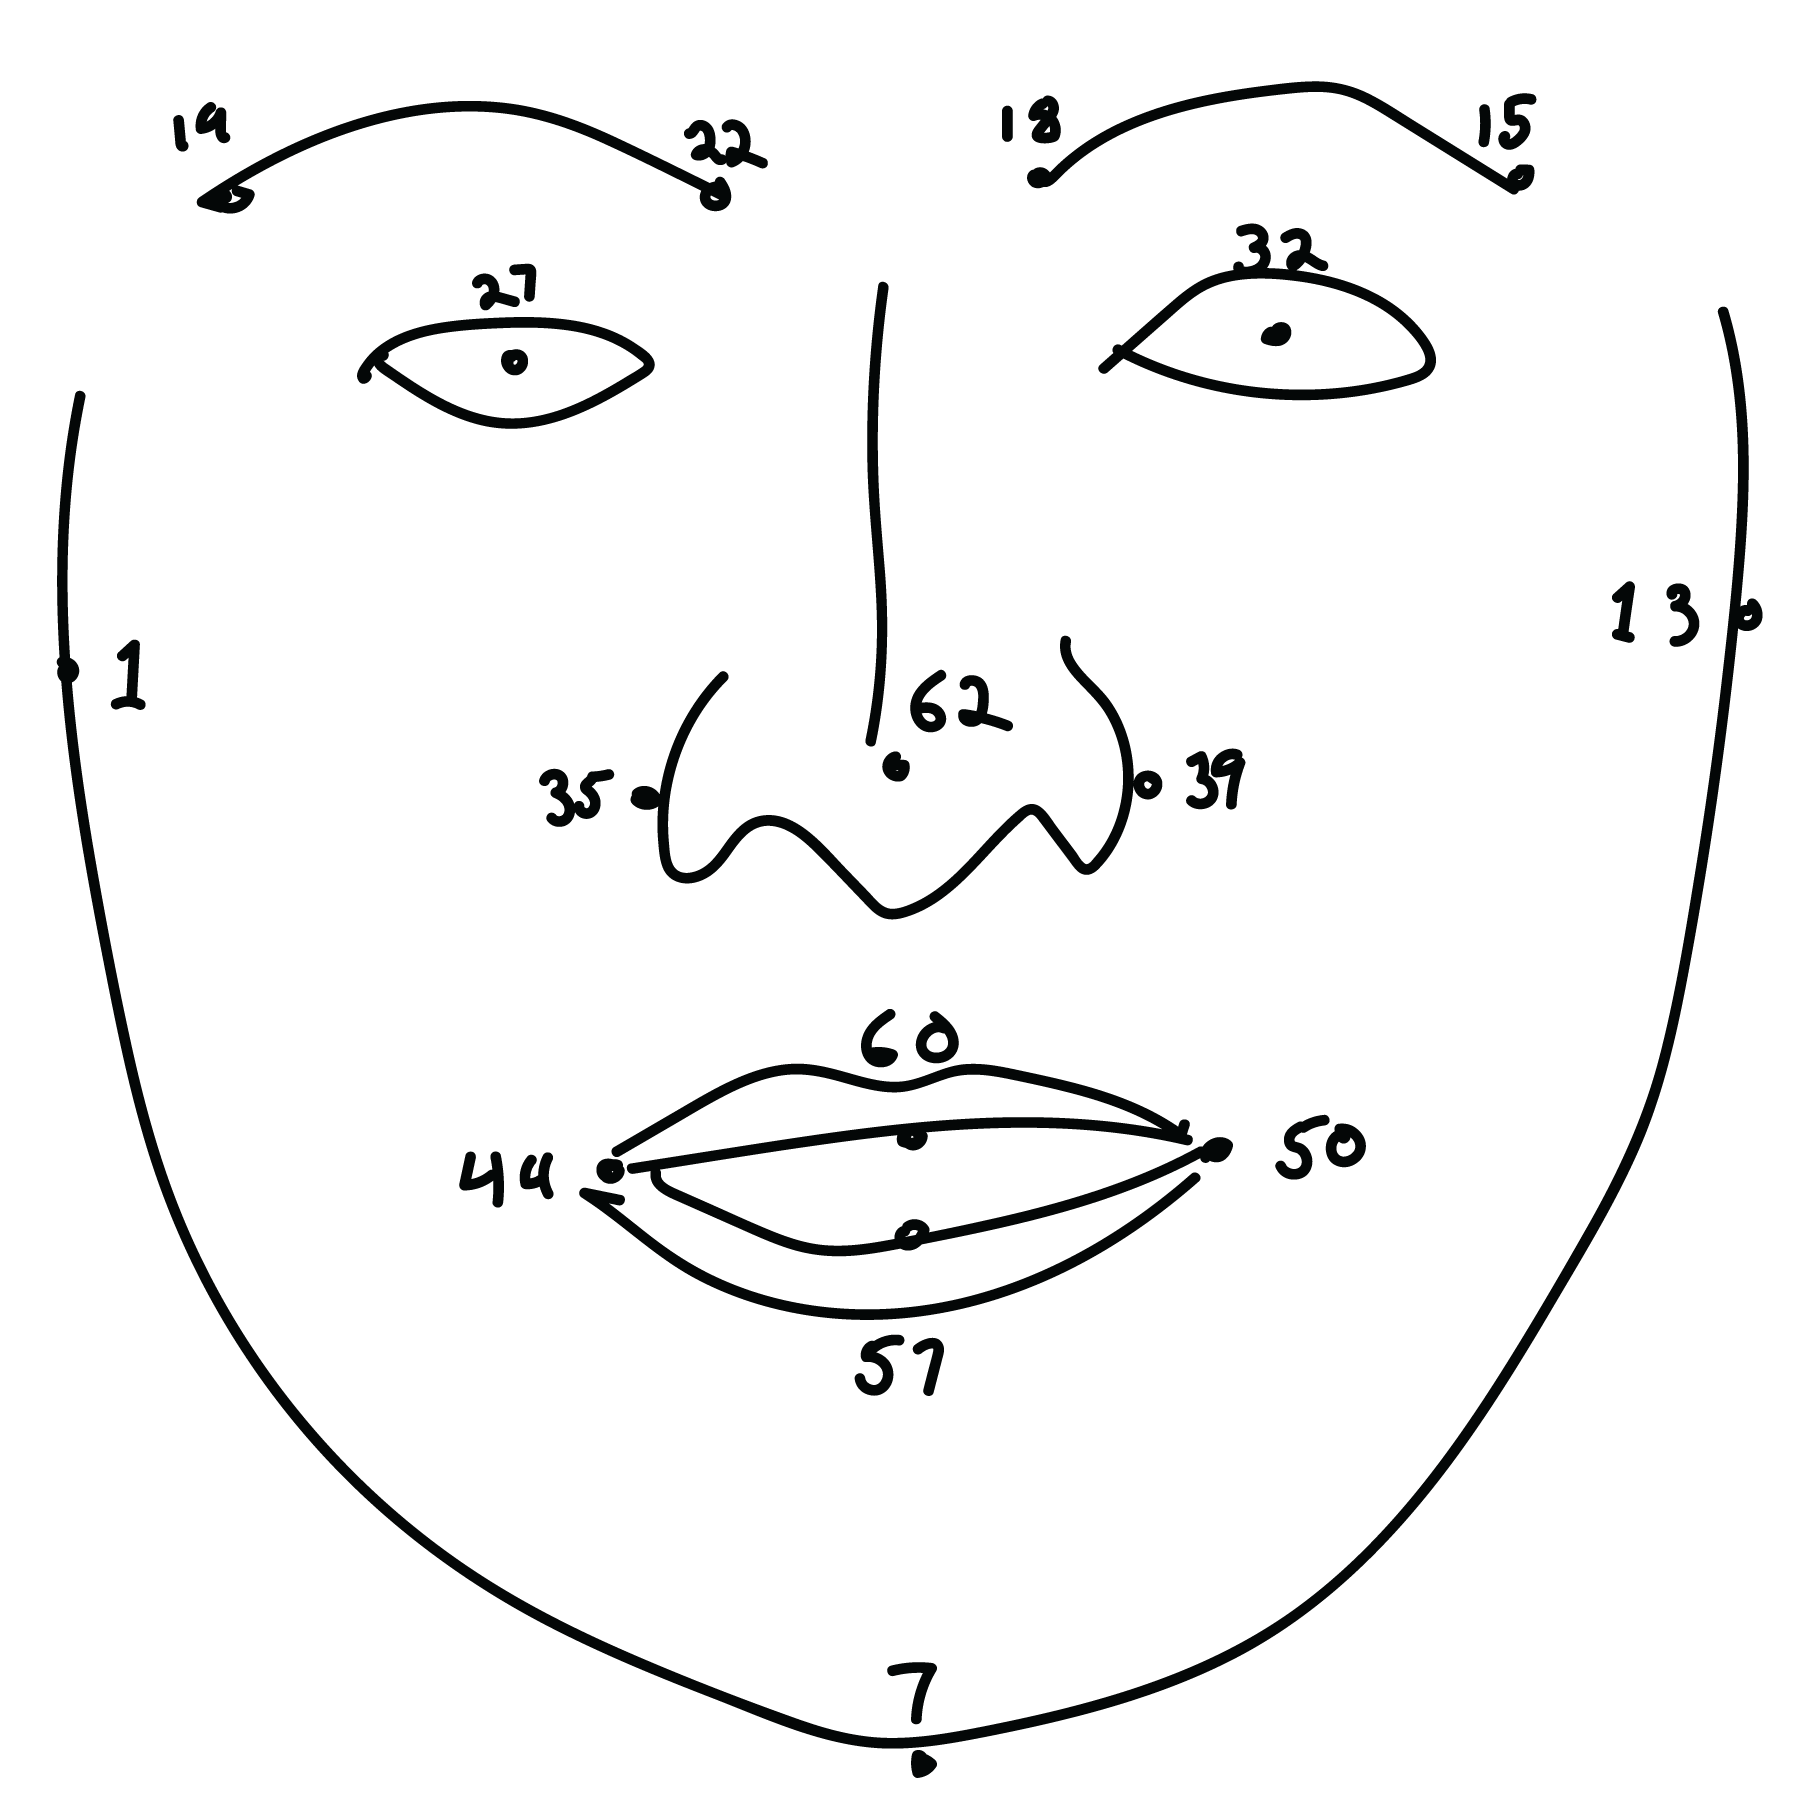 Face with numbered feature recognition dots